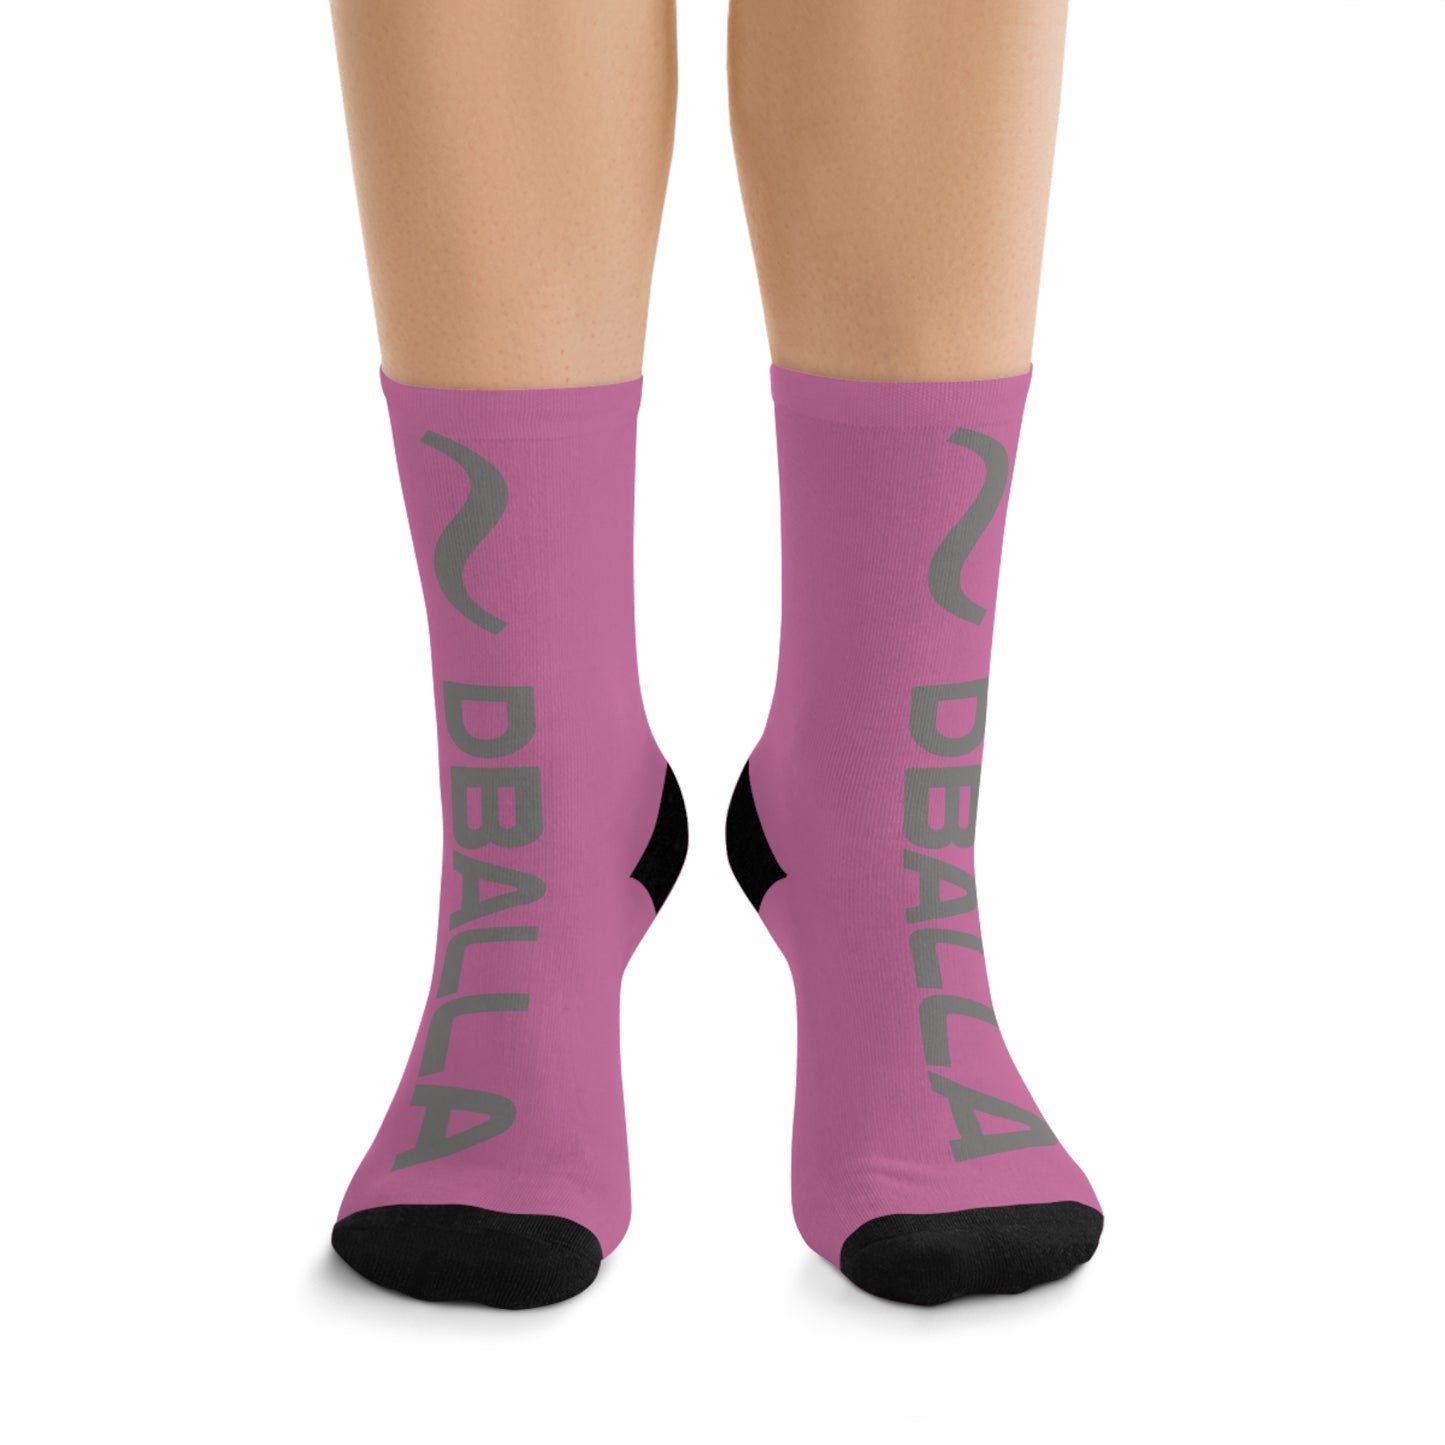 "FOOTCOVERS" Recycled Poly Socks - Blush Pink